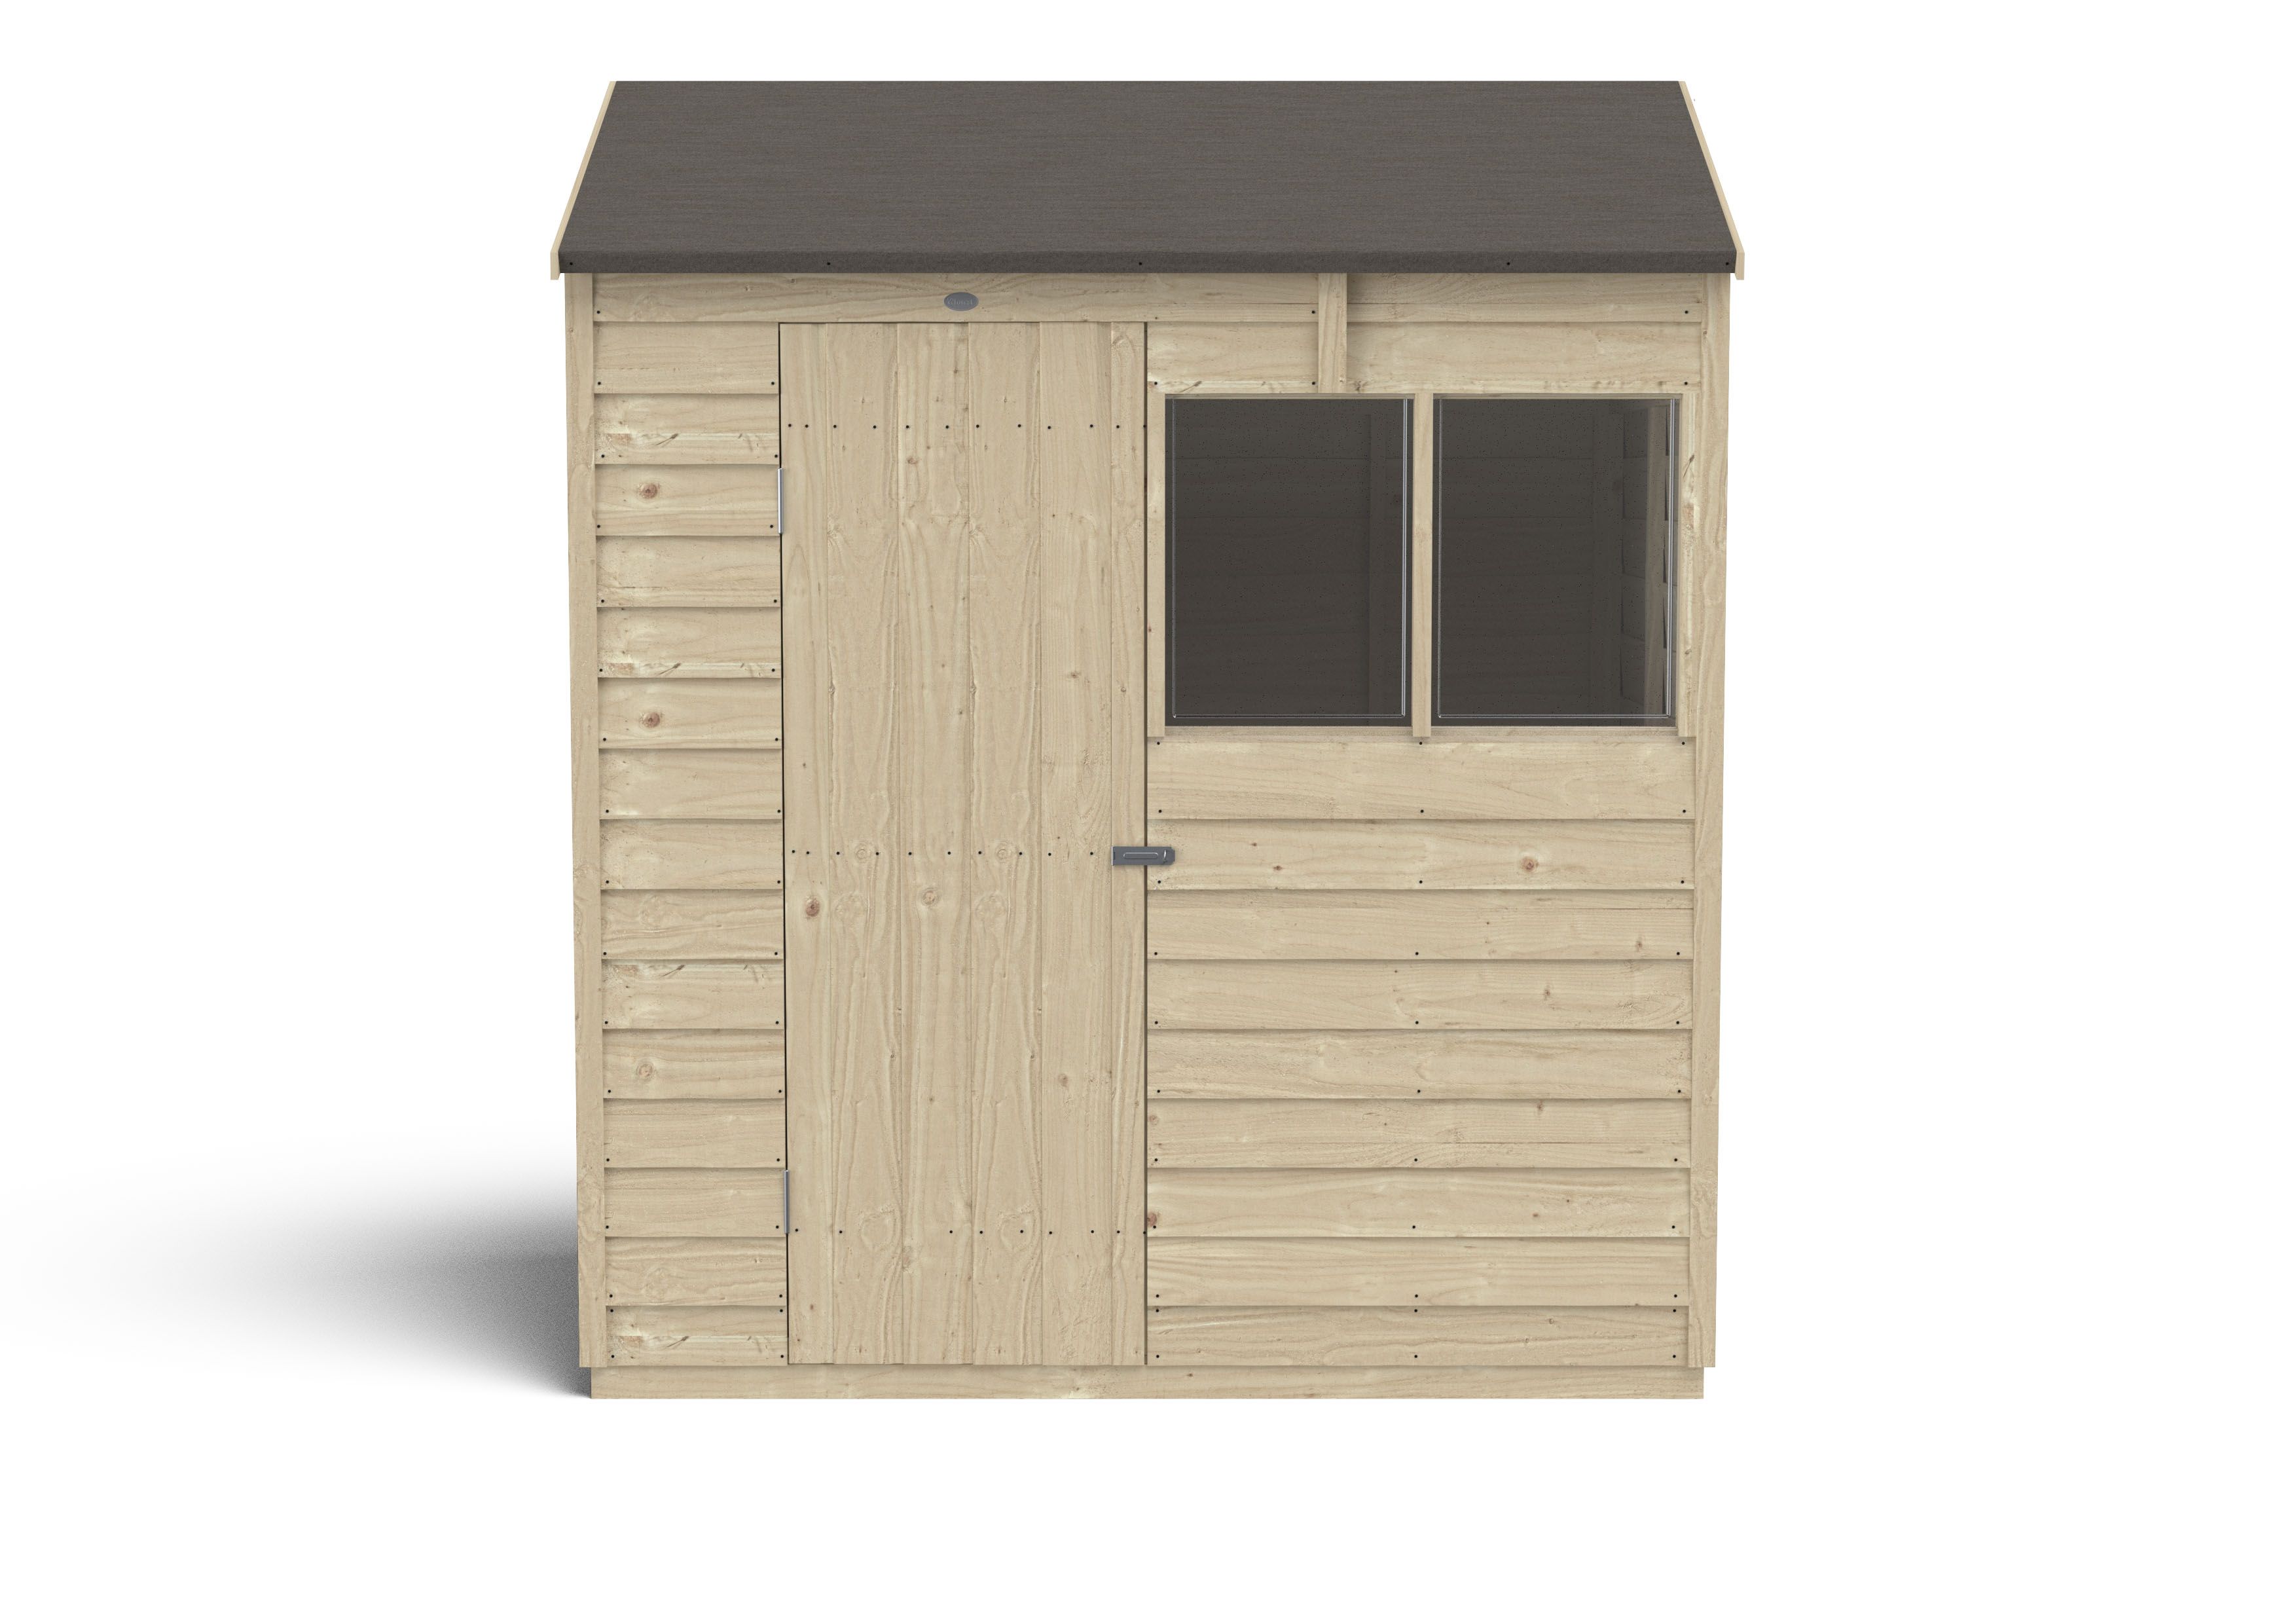 Forest Garden Overlap 6x4 ft Reverse apex Wooden Pressure treated Shed with floor & 2 windows (Base included) - Assembly service included